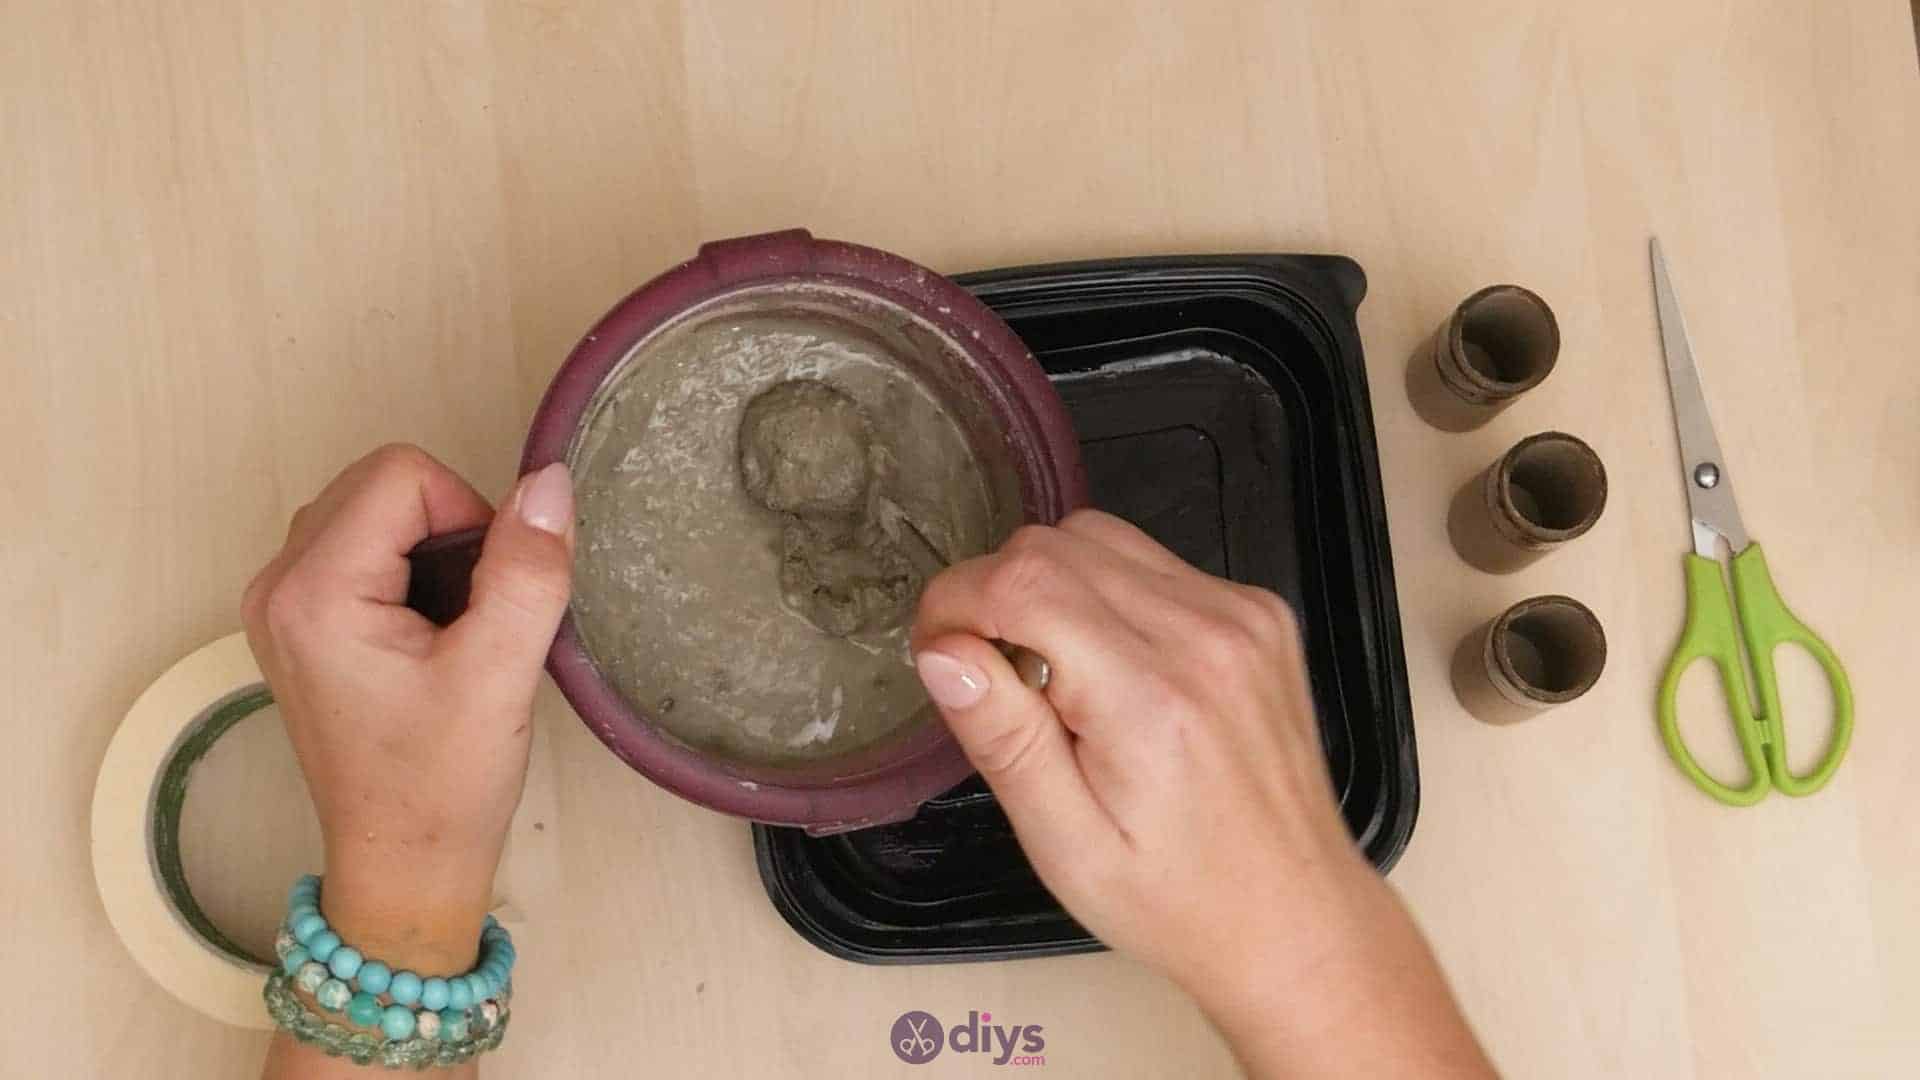 Diy concrete candle holder plate step 4